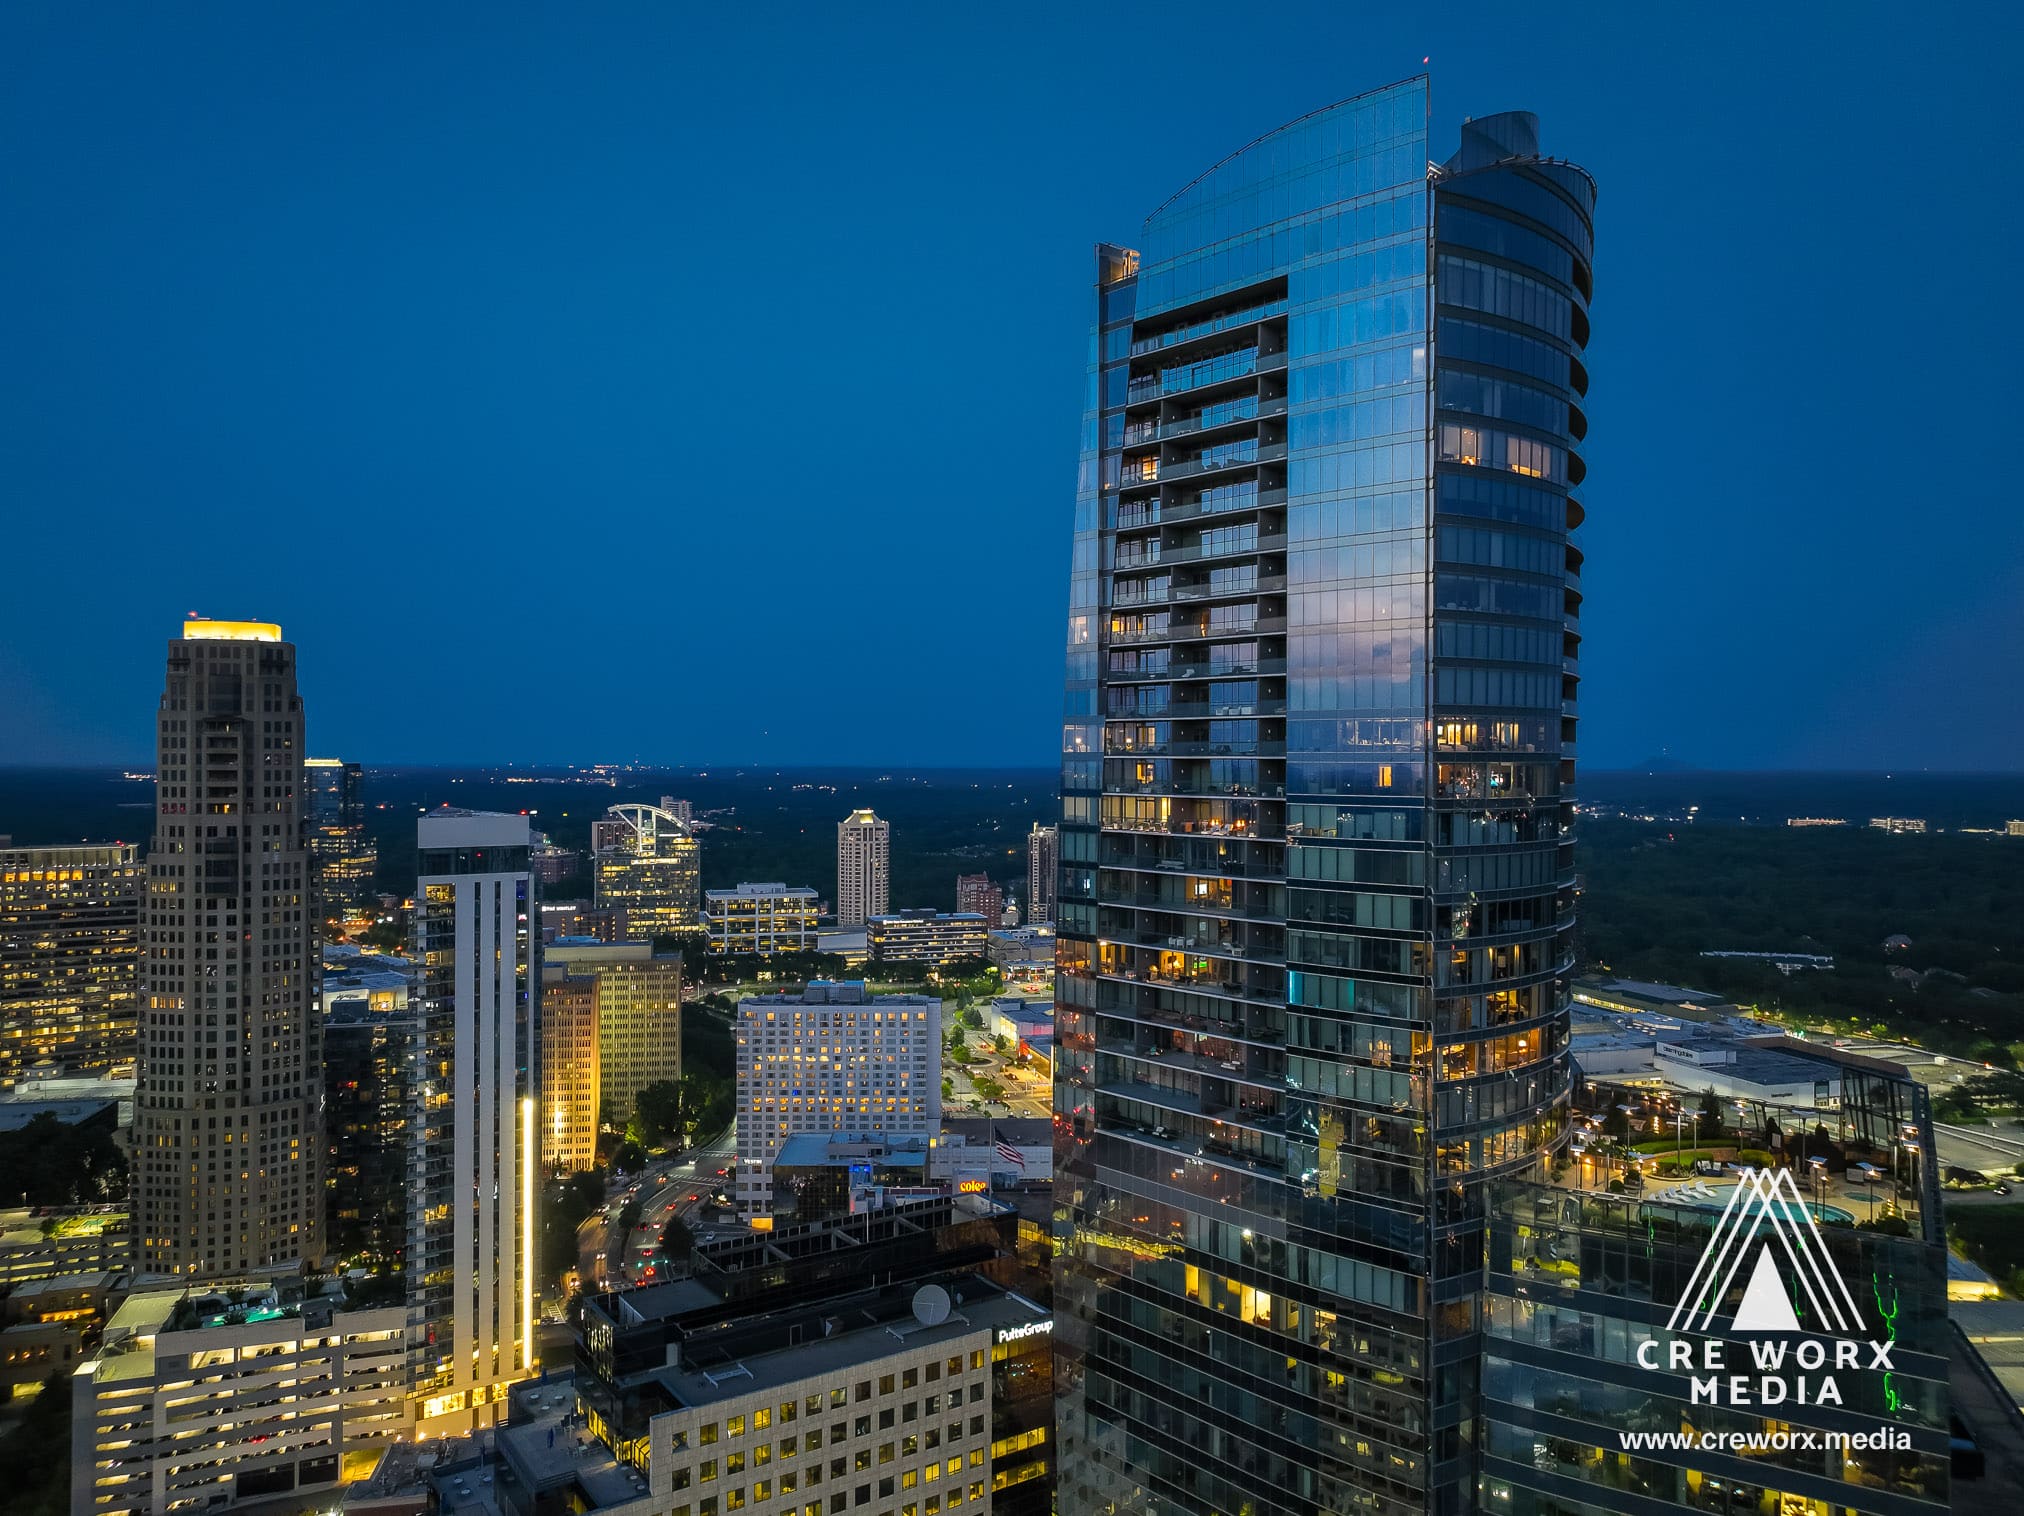 Explore how commercial property drone photography elevates property marketing. Discover innovative techniques to showcase your commercial real estate